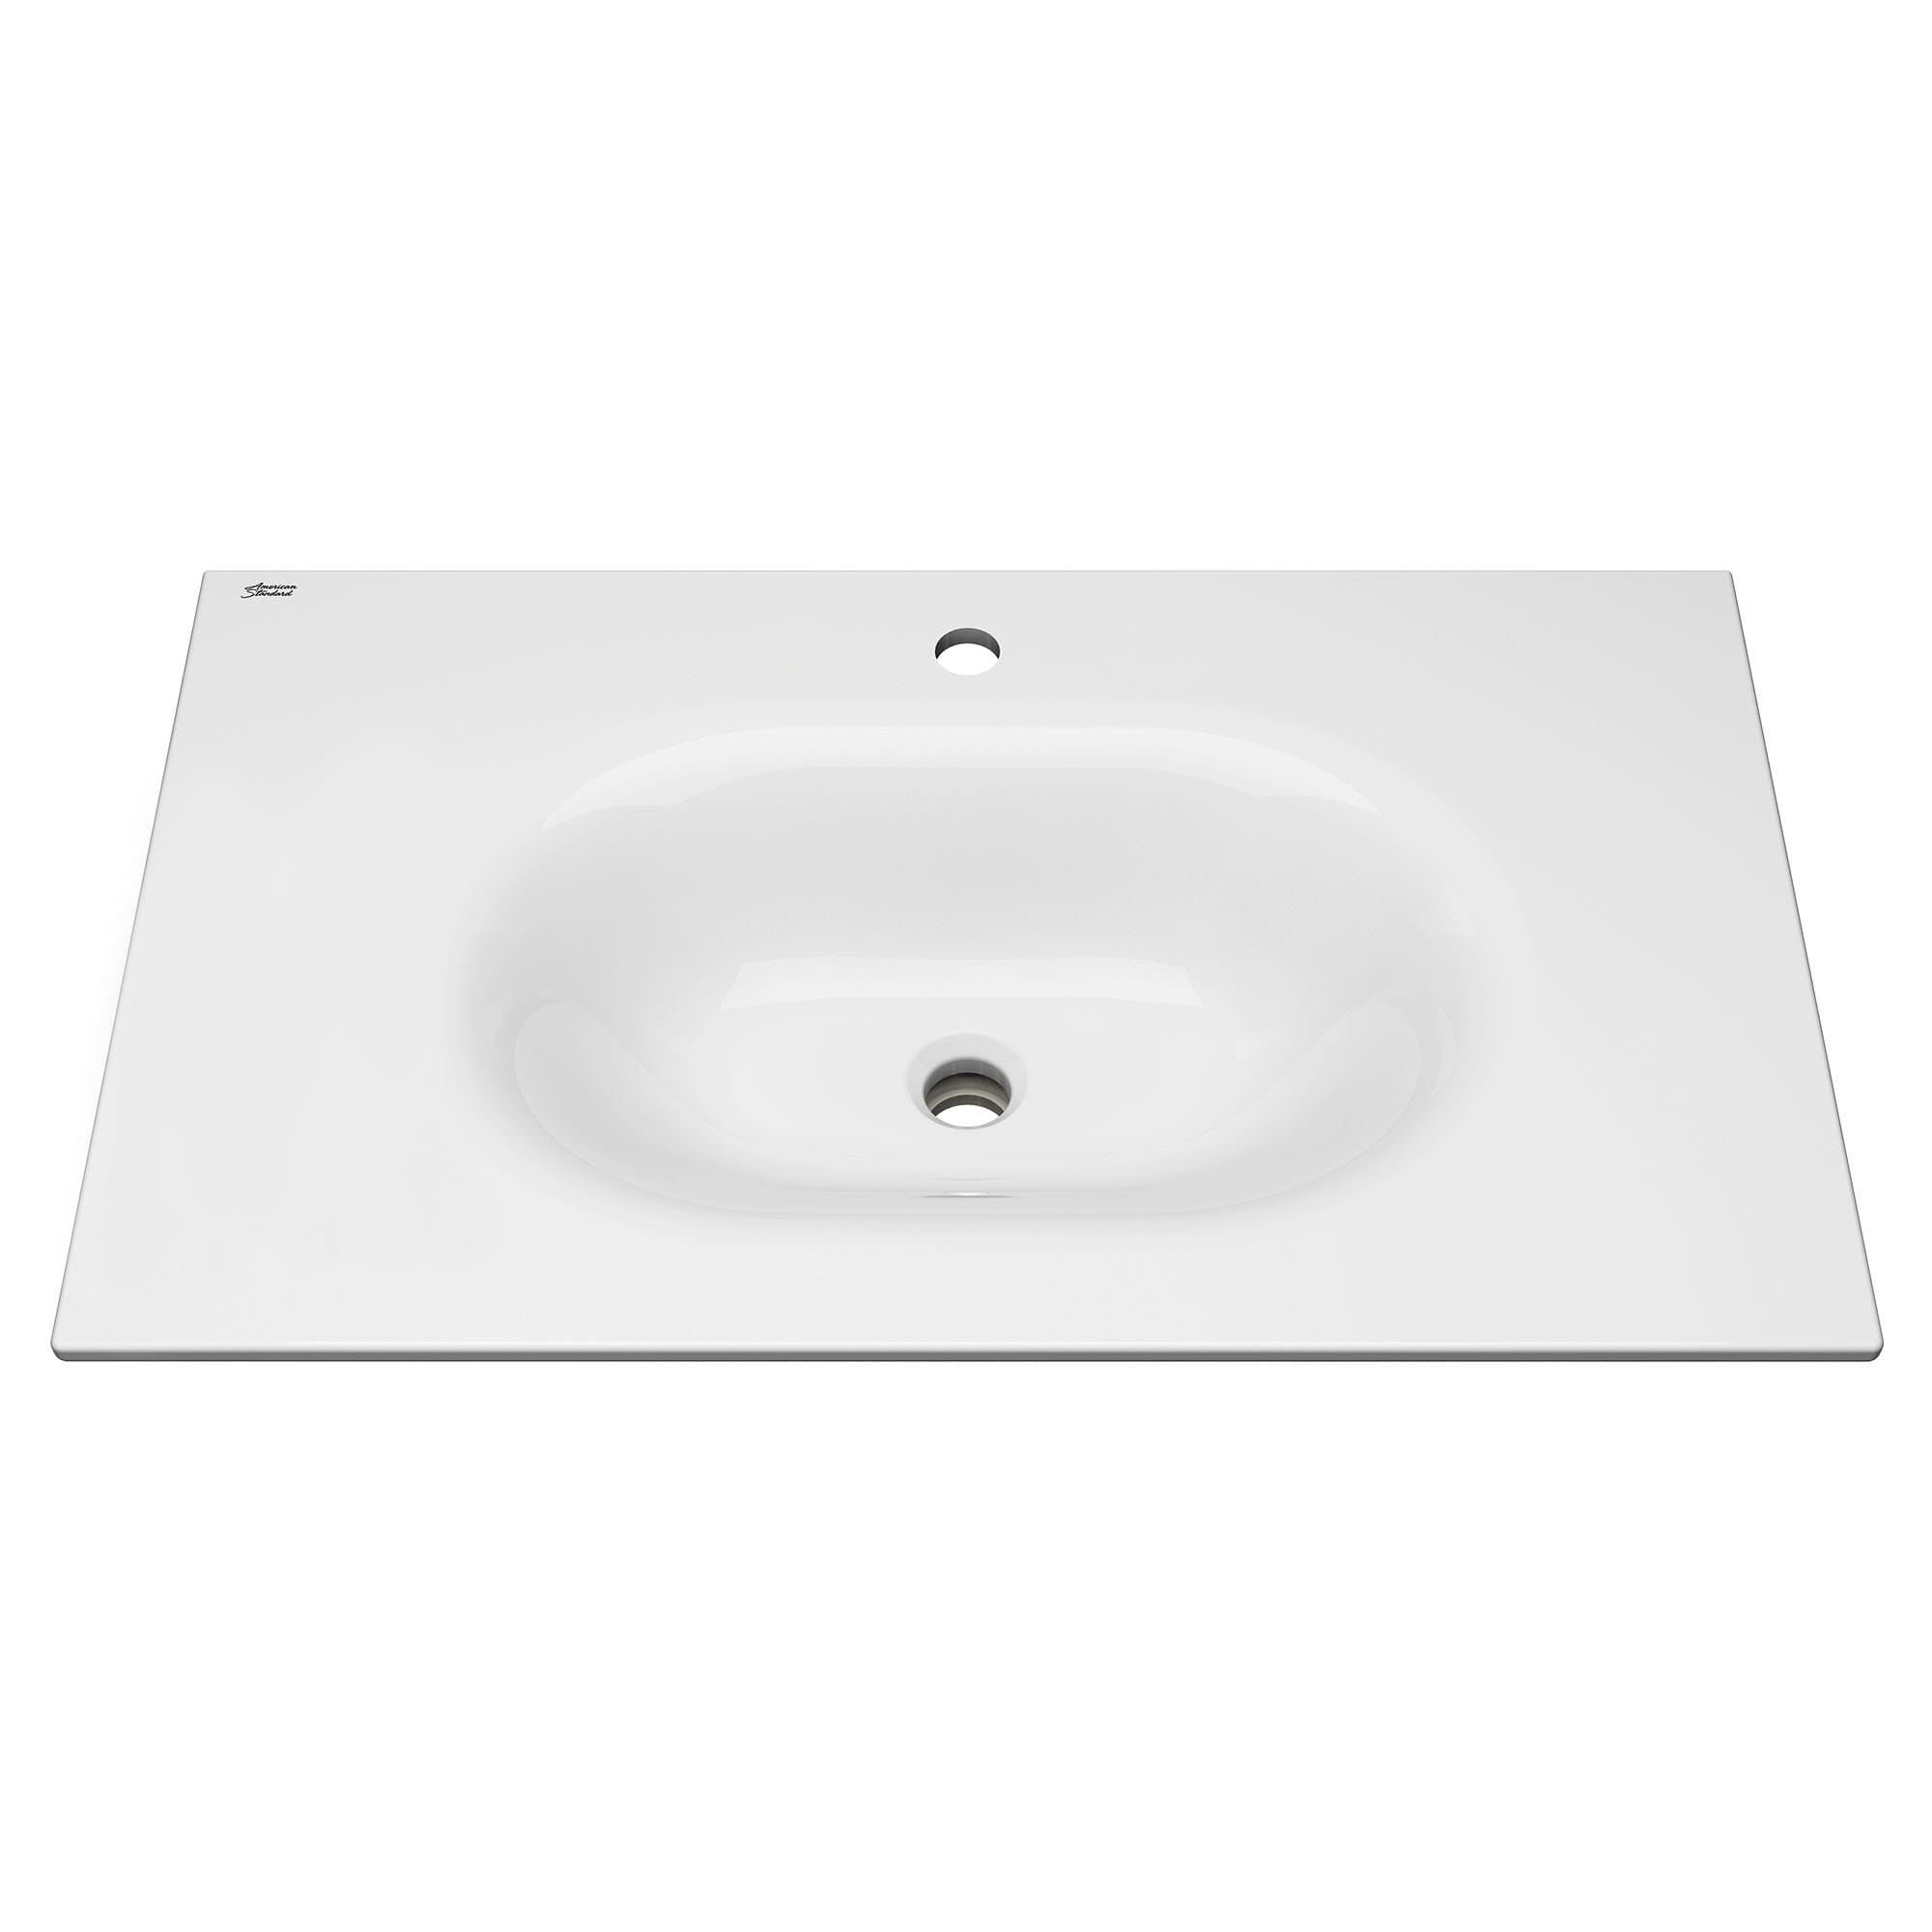 Studio S 33 Inch Vitreous China Vanity Sink Top Center Hole Only WHITE